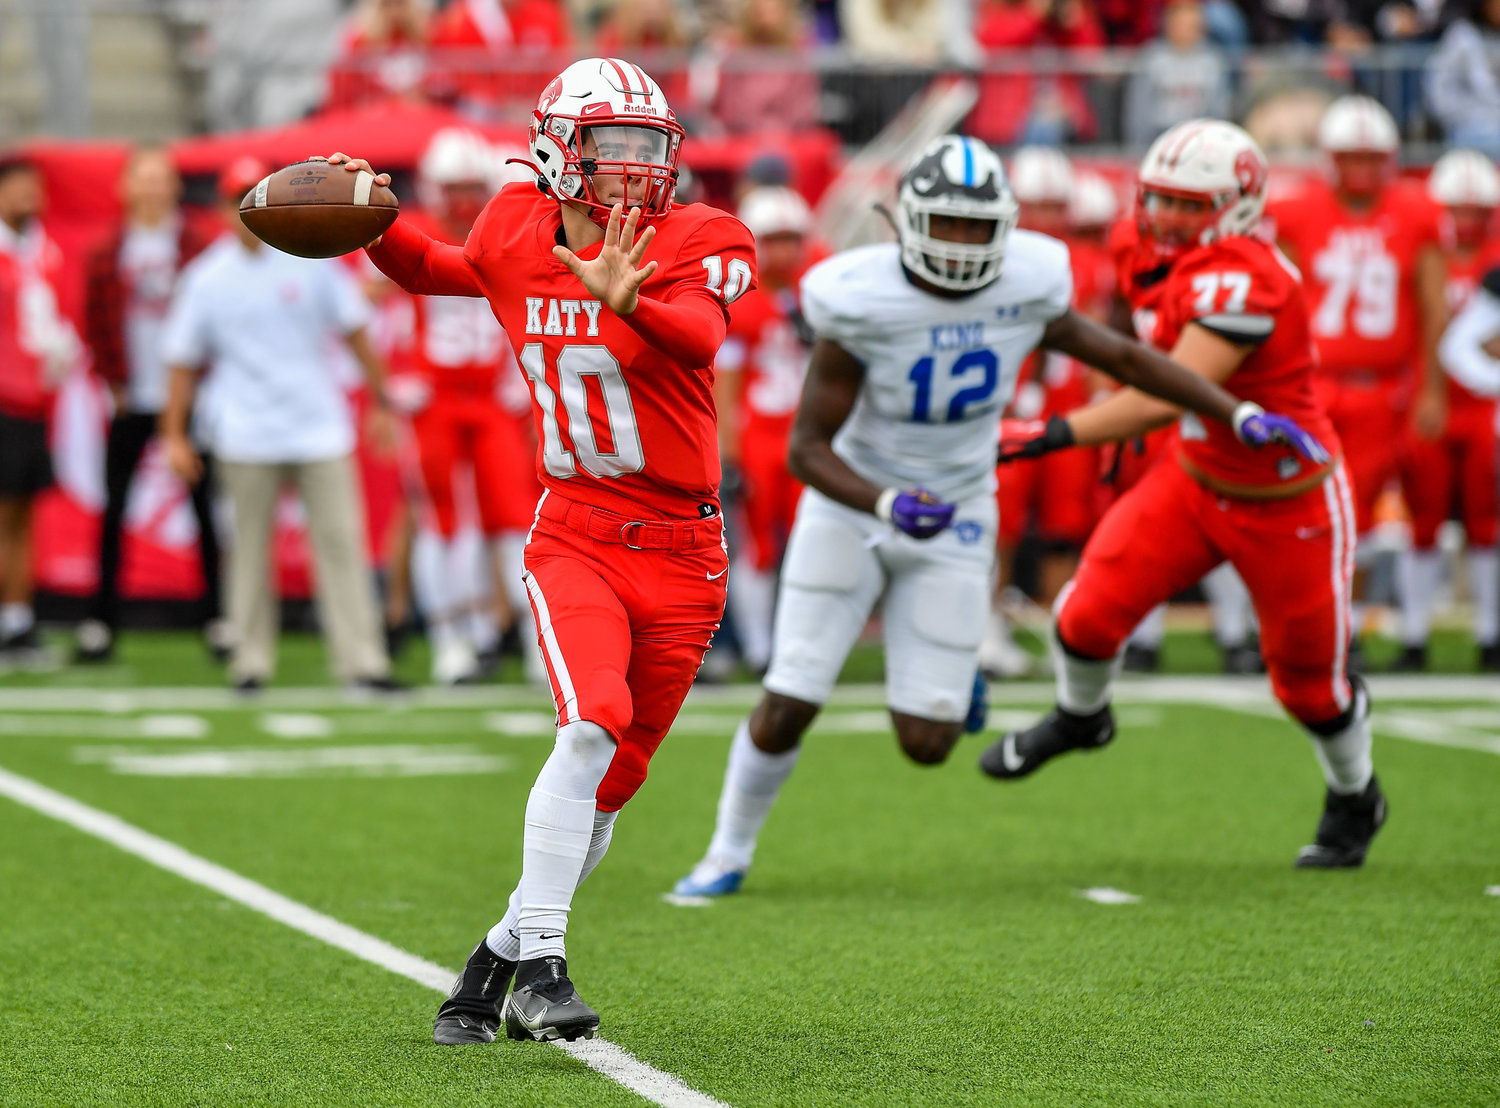 Katy Tx. Nov 26, 2021: Katy's #10 Caleb Koger delivers a pass during the UIL regional playoff game between Katy Tigers and King Panthers at Legacy Stadium in Katy. (Photo by Mark Goodman / Katy Times)